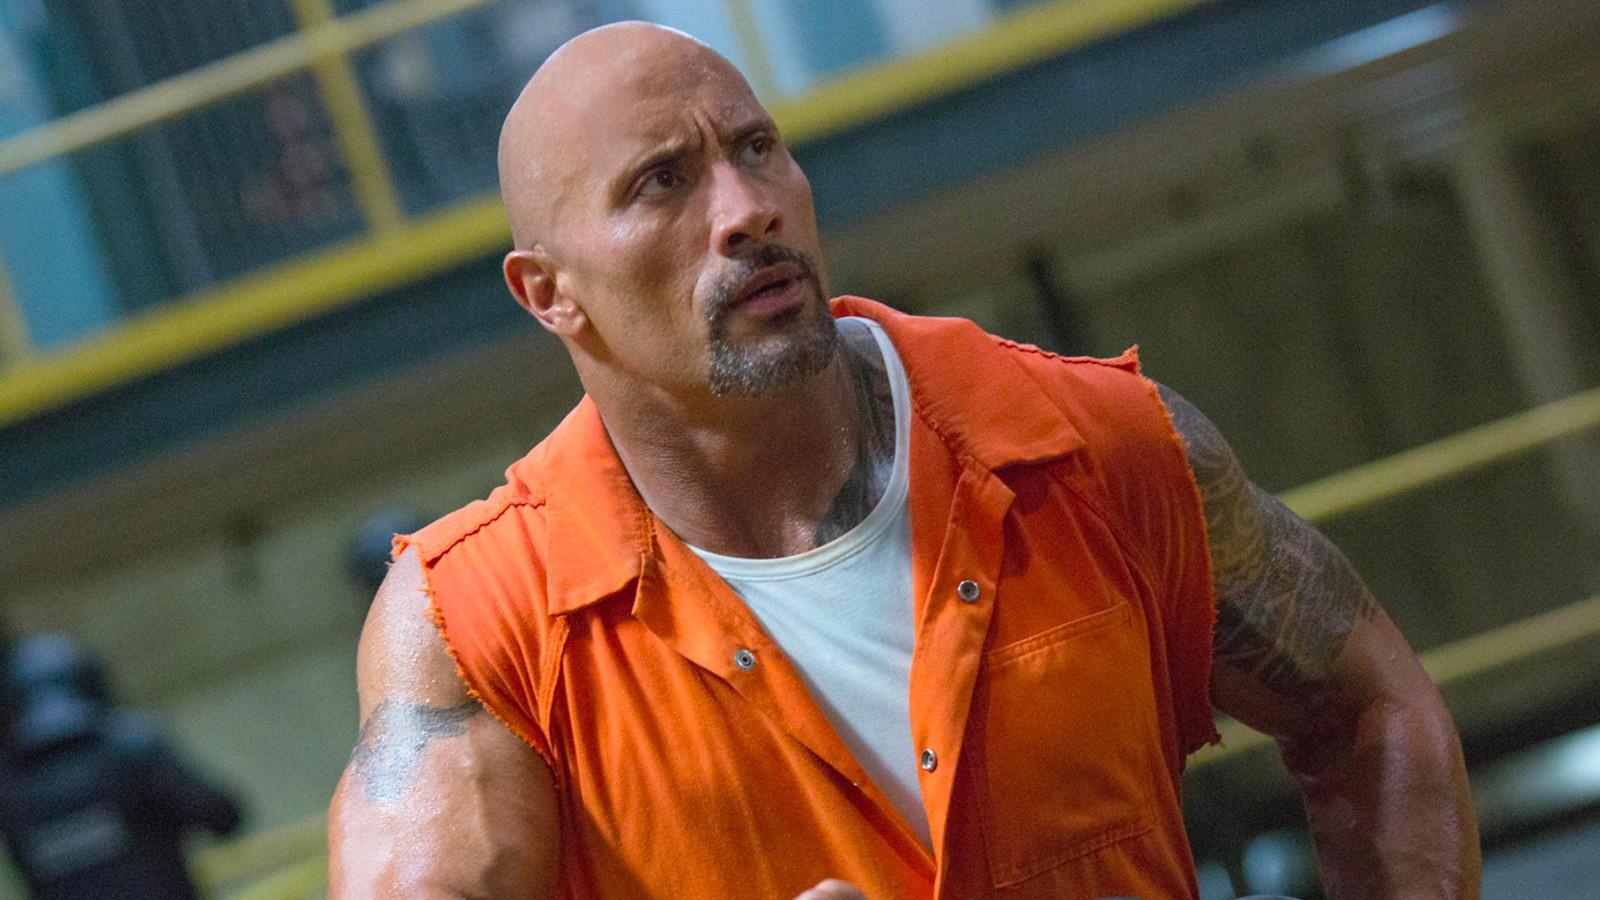 Dwayne The Rock Johnson in Fast and Furious 8